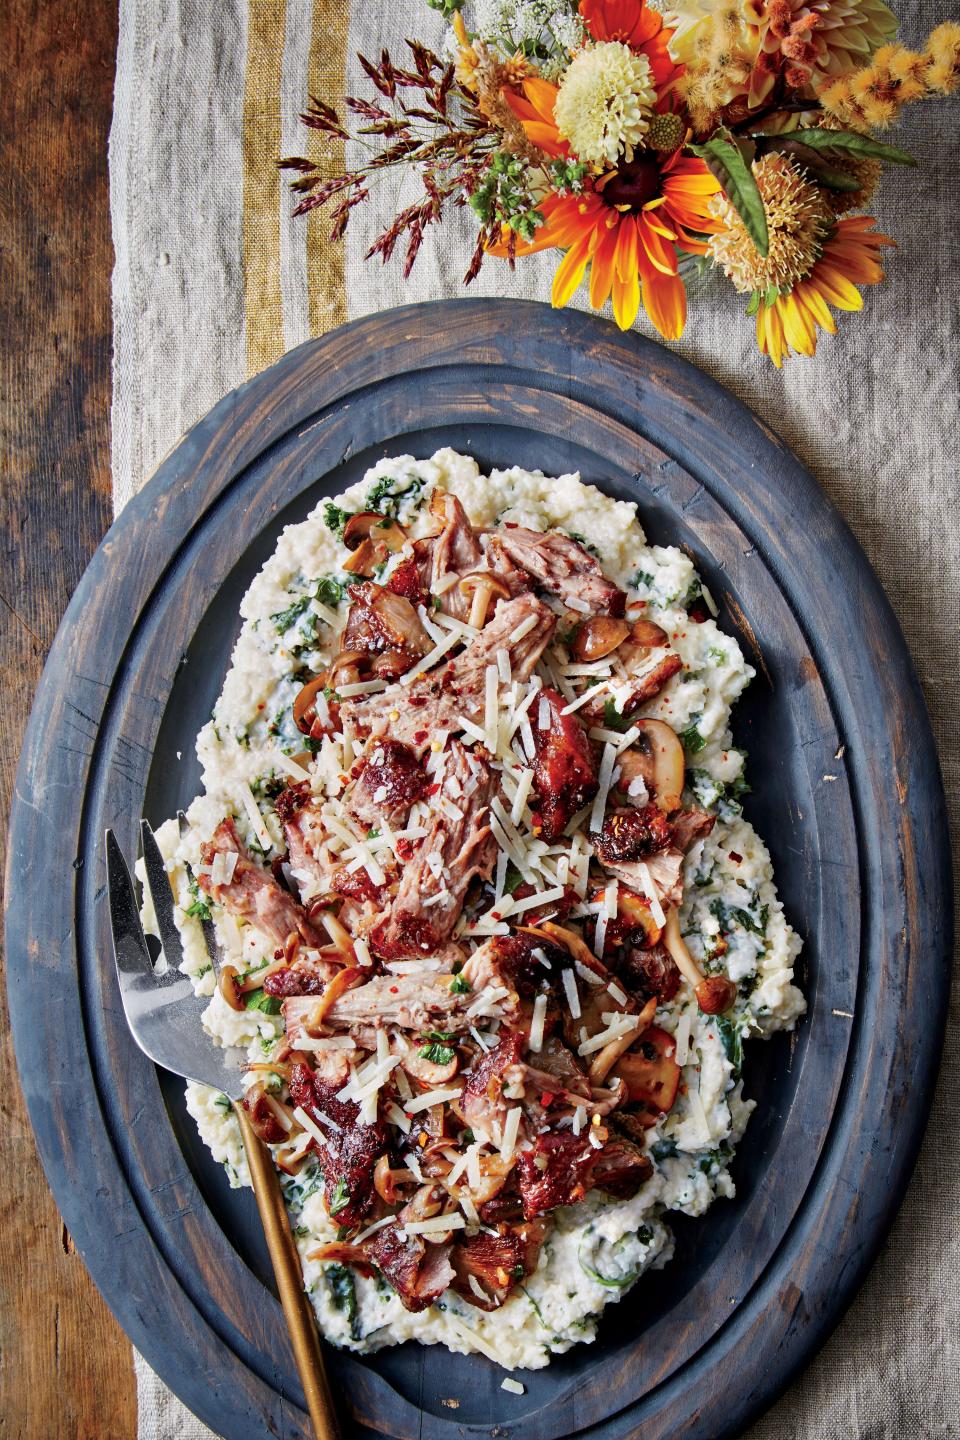 Italian-Style Grits and Greens with Pulled Pork and Mushrooms